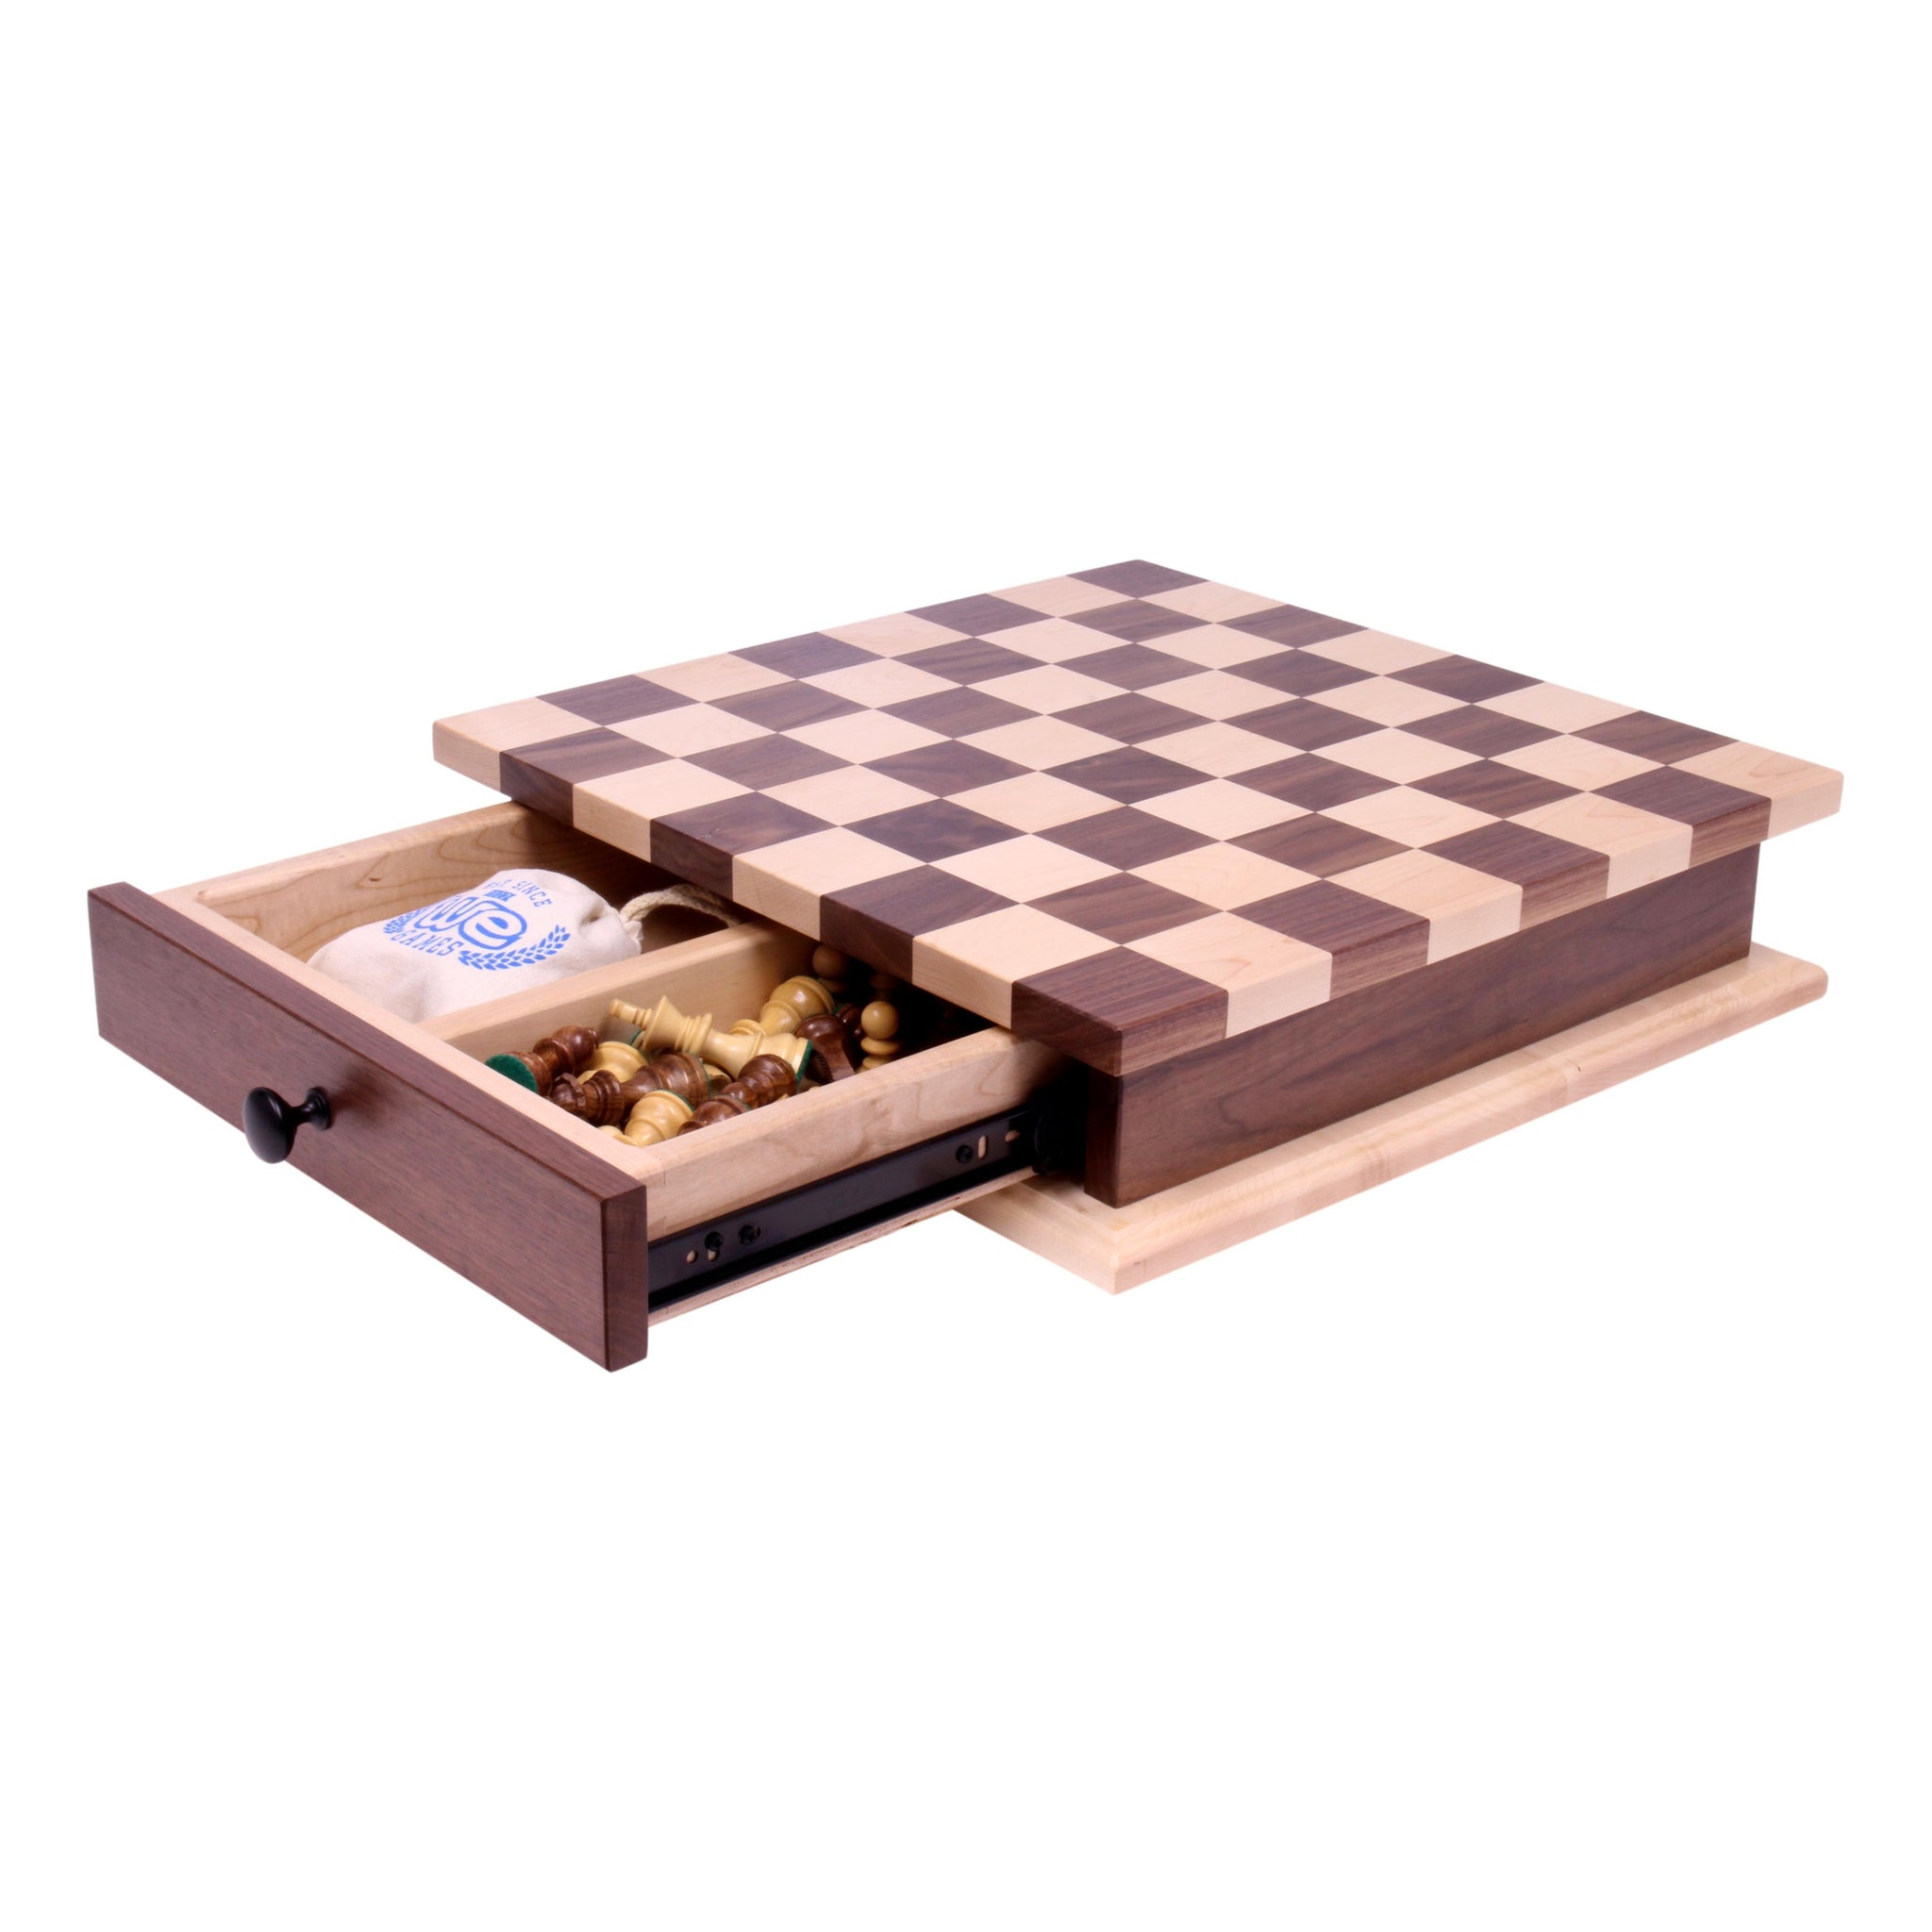 Wooden Checker Board from DutchCrafters Amish Furniture